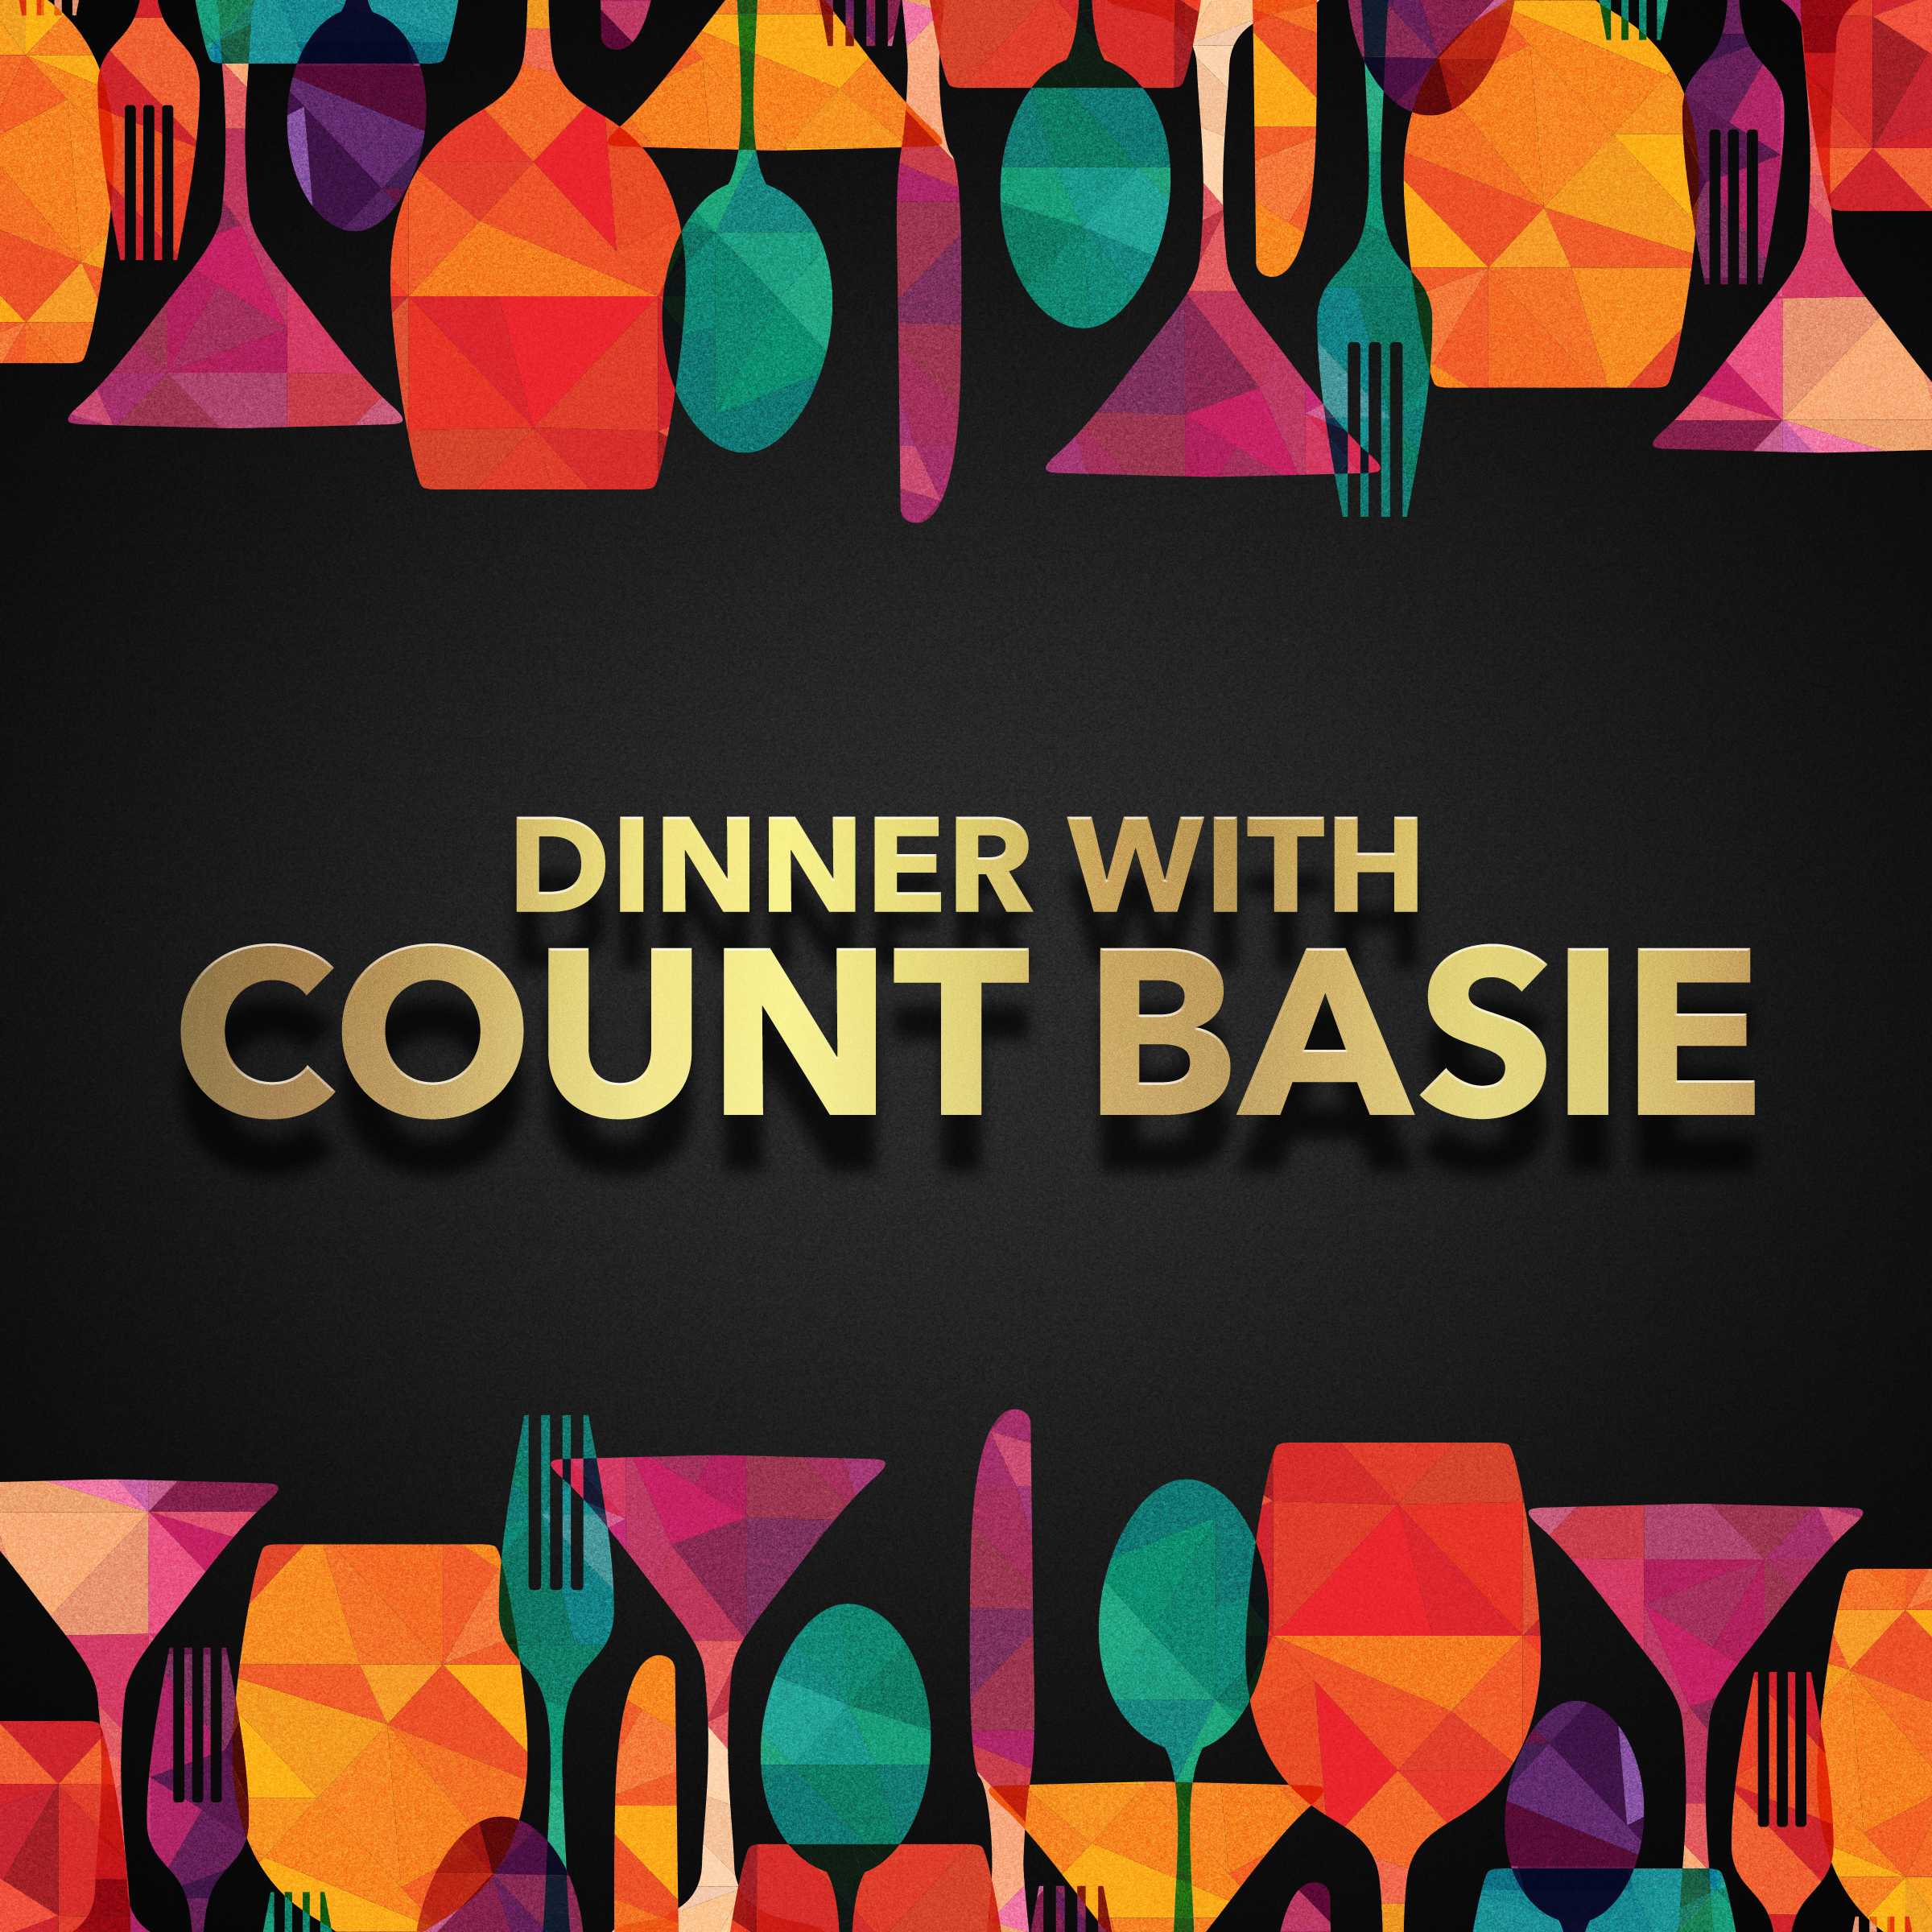 Dinner with Count Basie